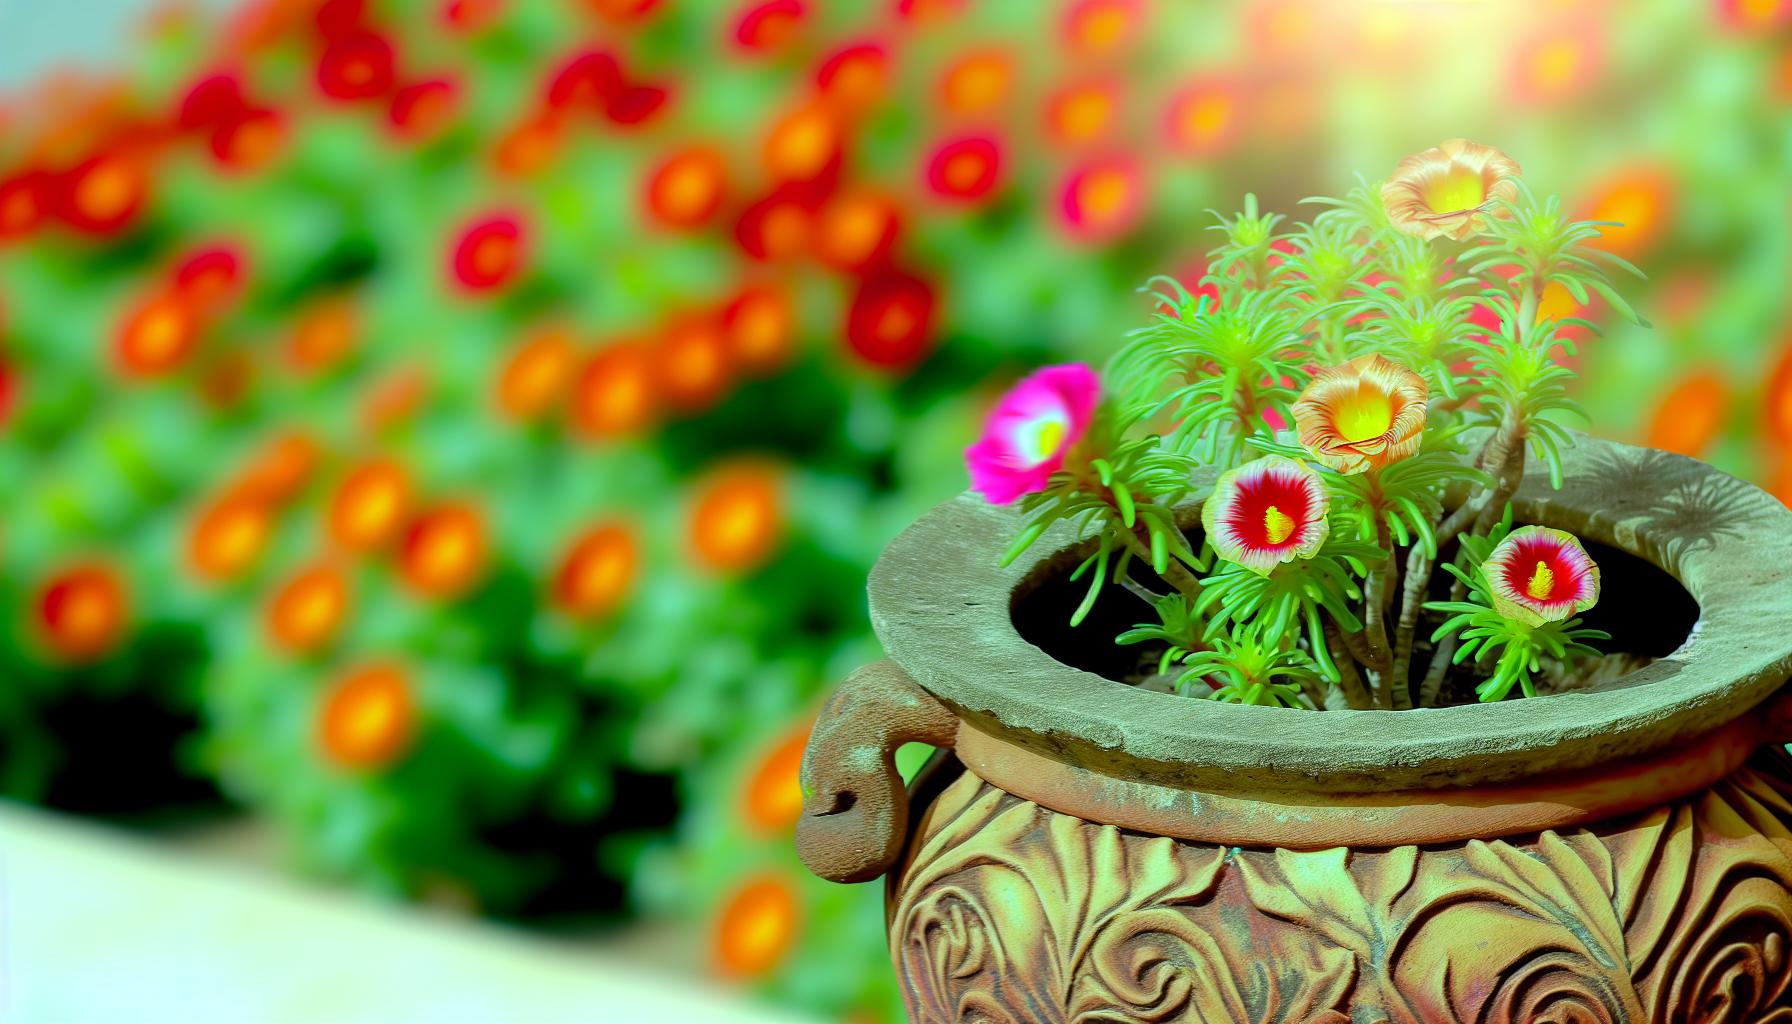 a flower growing in a ceramic pot